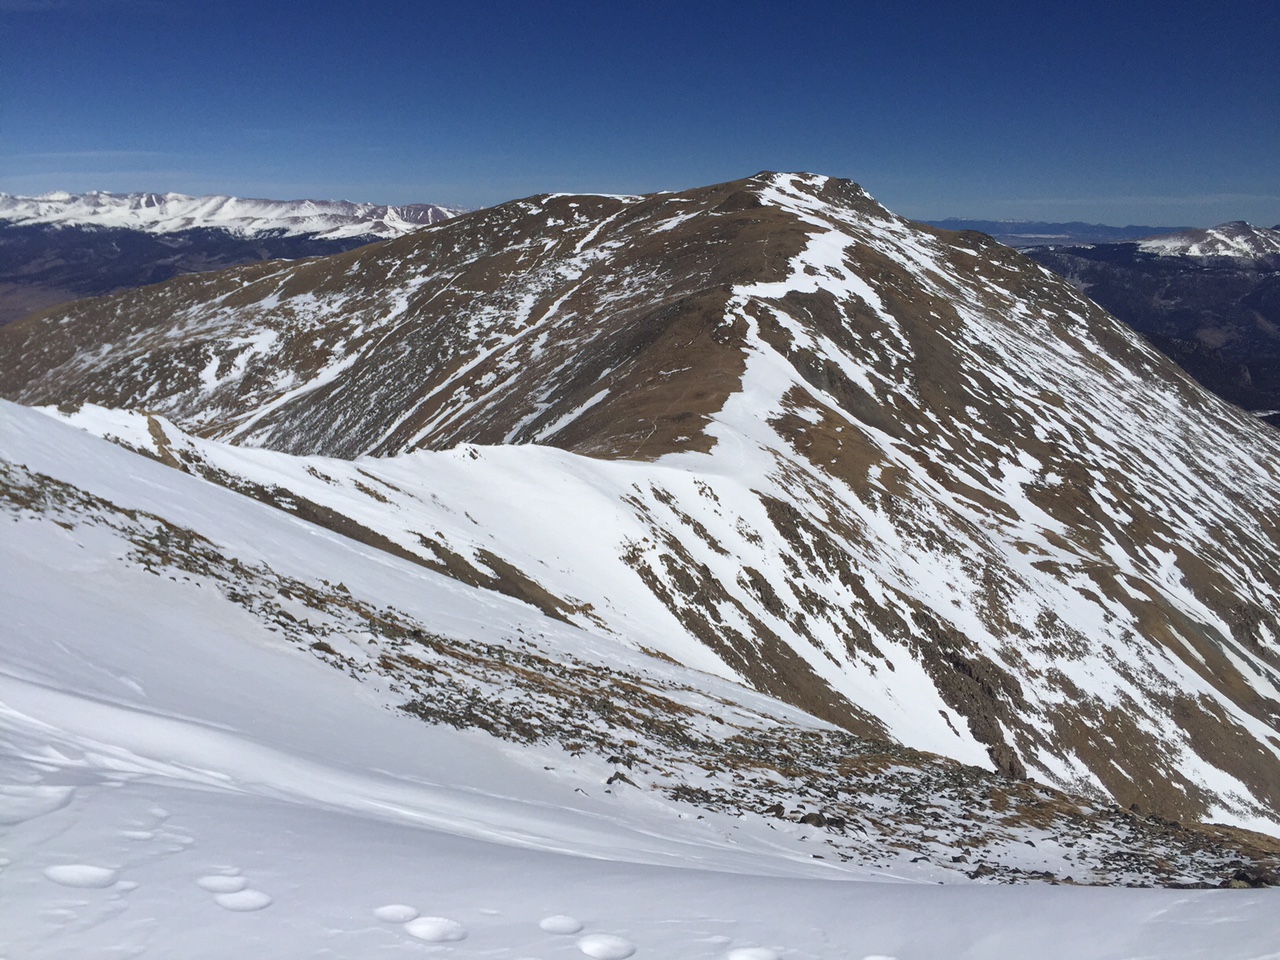 Looking over to Oxford, I was able to ski the windblown ridgeline to put together a line off the top.